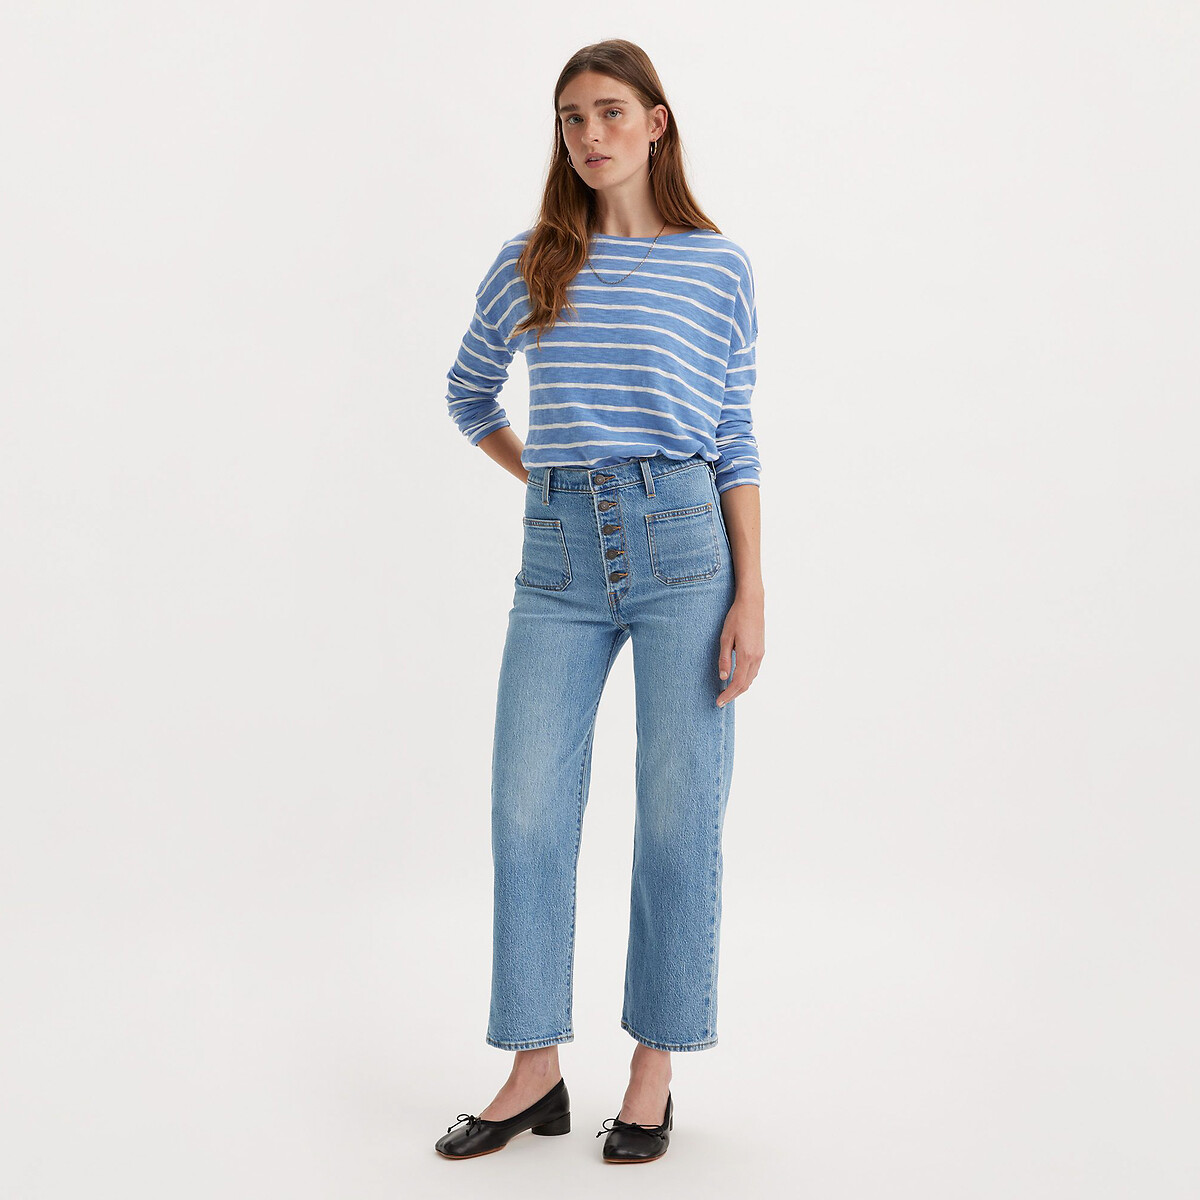 Ribcage Patch Pocket Jeans with High Waist